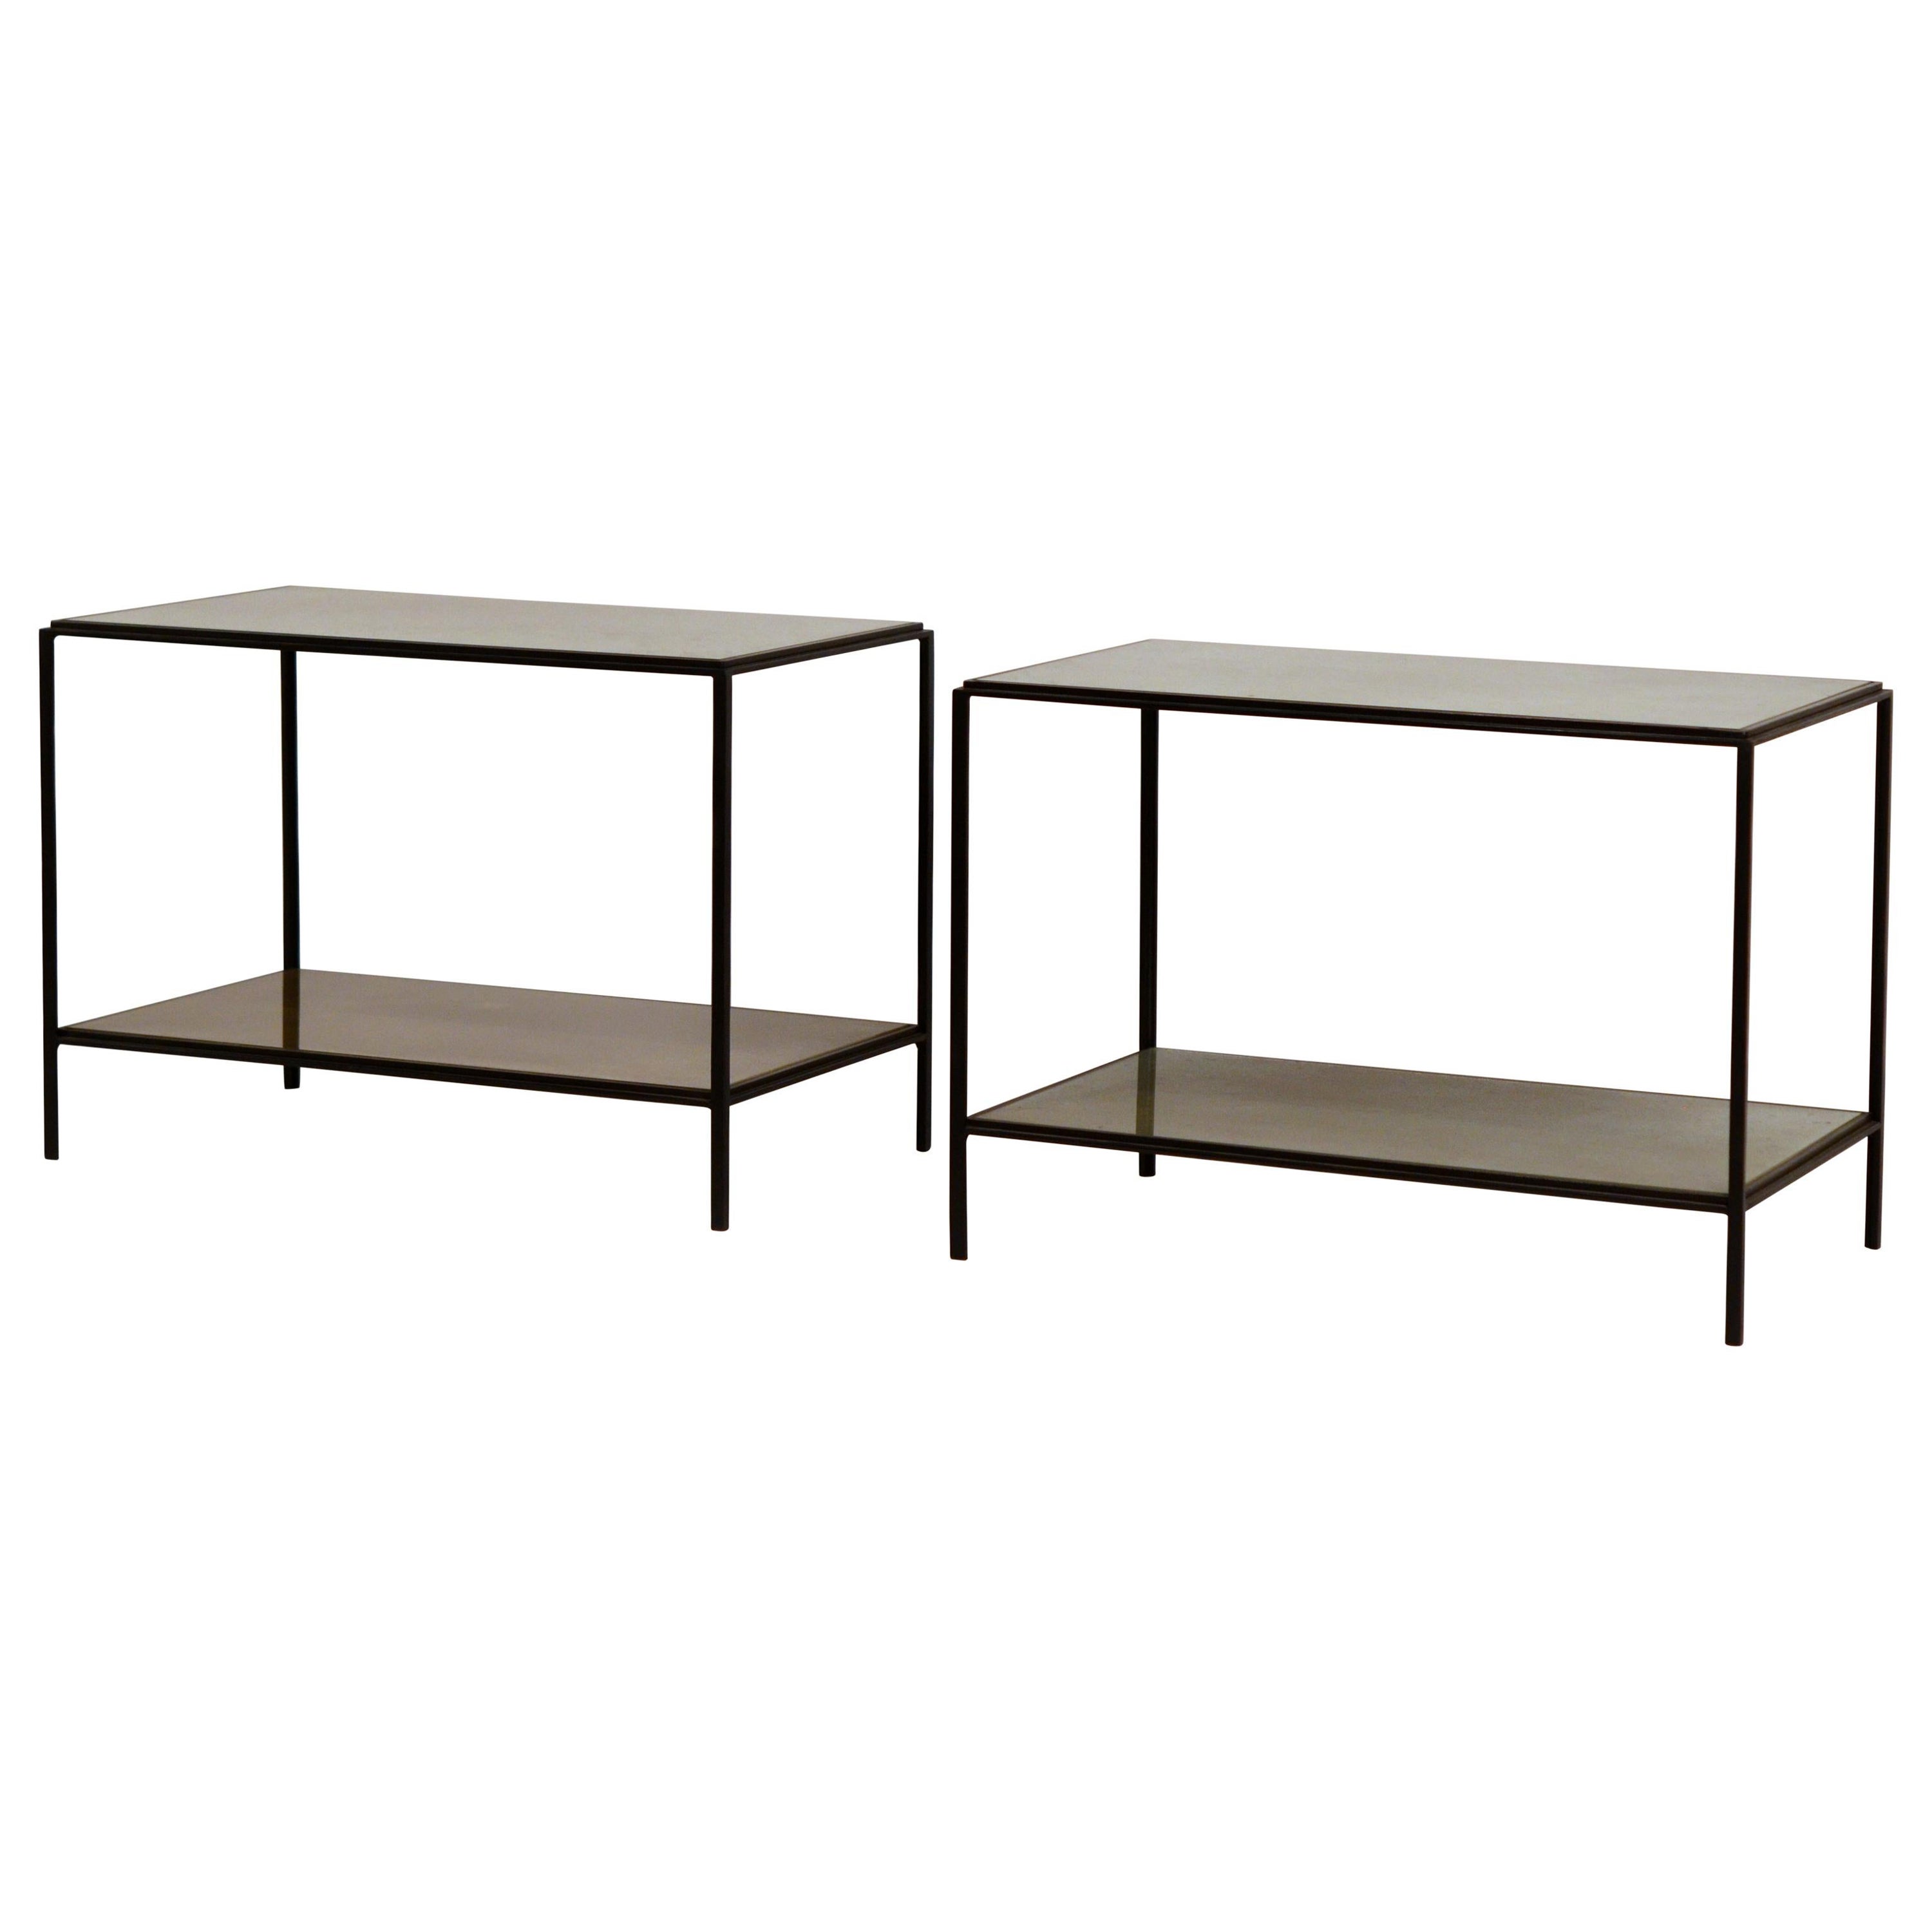 Pair of Chic 'Rectiligne' Mirrored End Tables by Design Frères For Sale